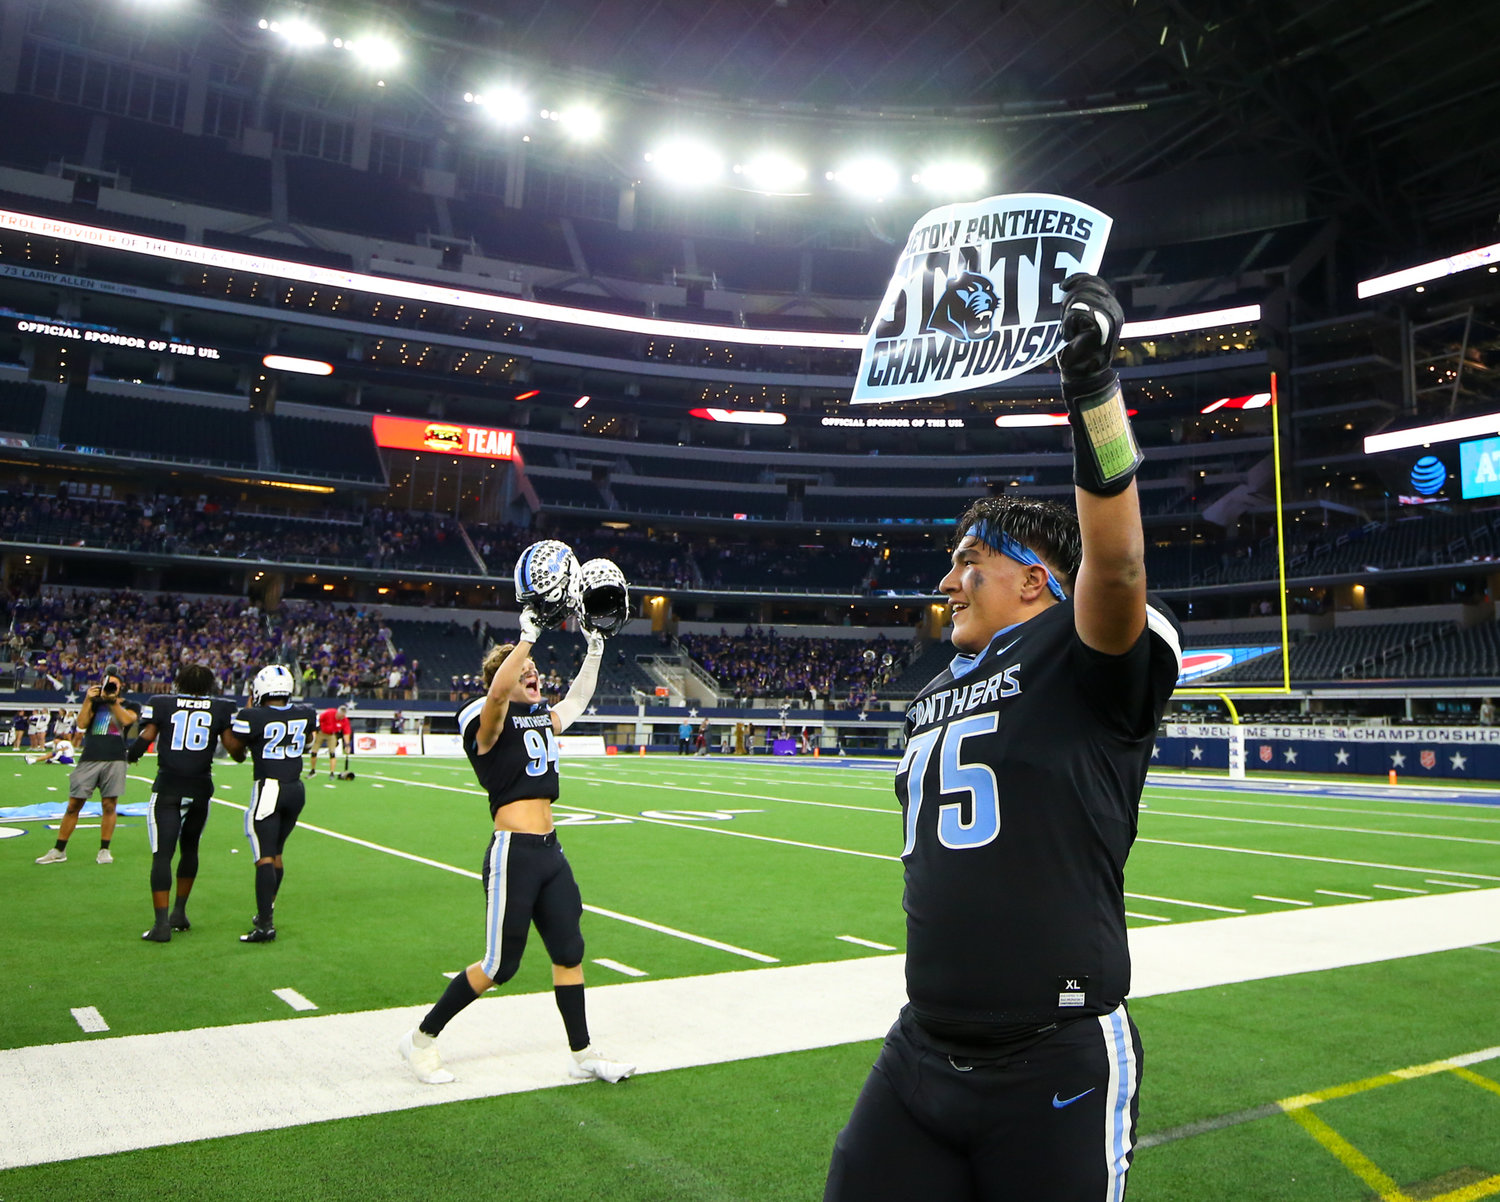 Paetow Panthers players celebrate a 27-24 win over College Station in the Class 5A Division I state football championship game on December 17, 2021 in Arlington, Texas.